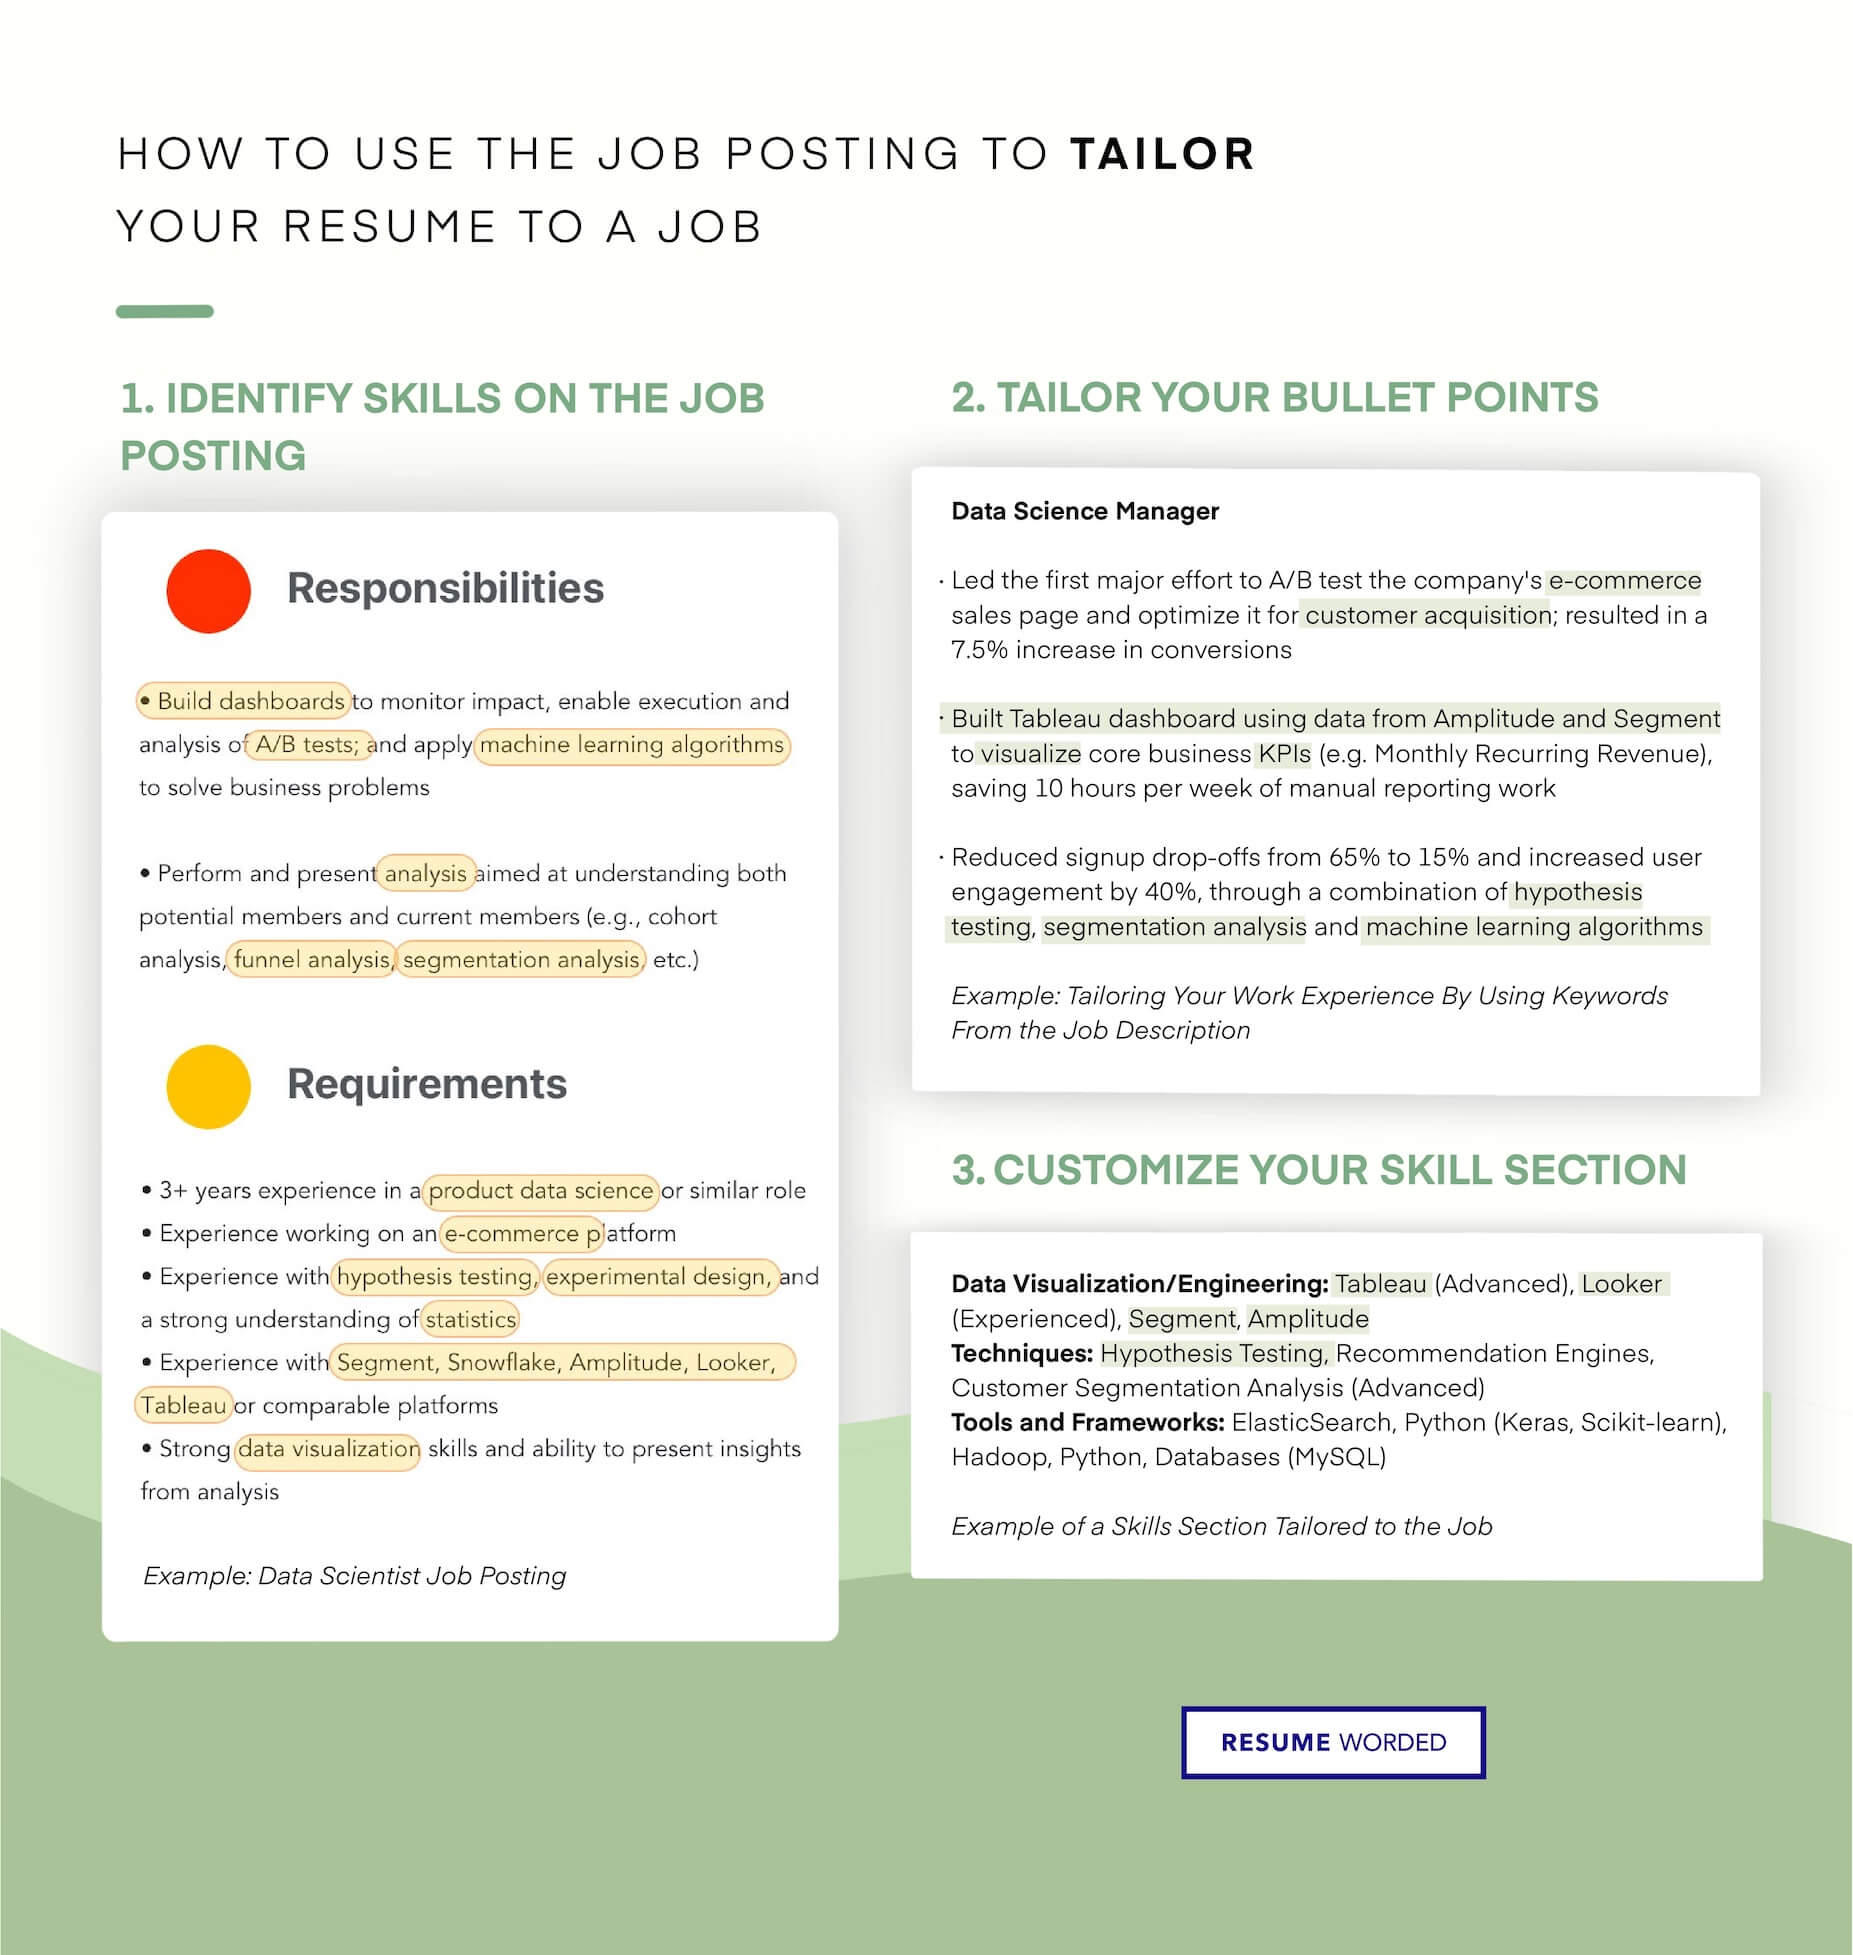 Tailor your tech skills sections - Solutions Consultant CV